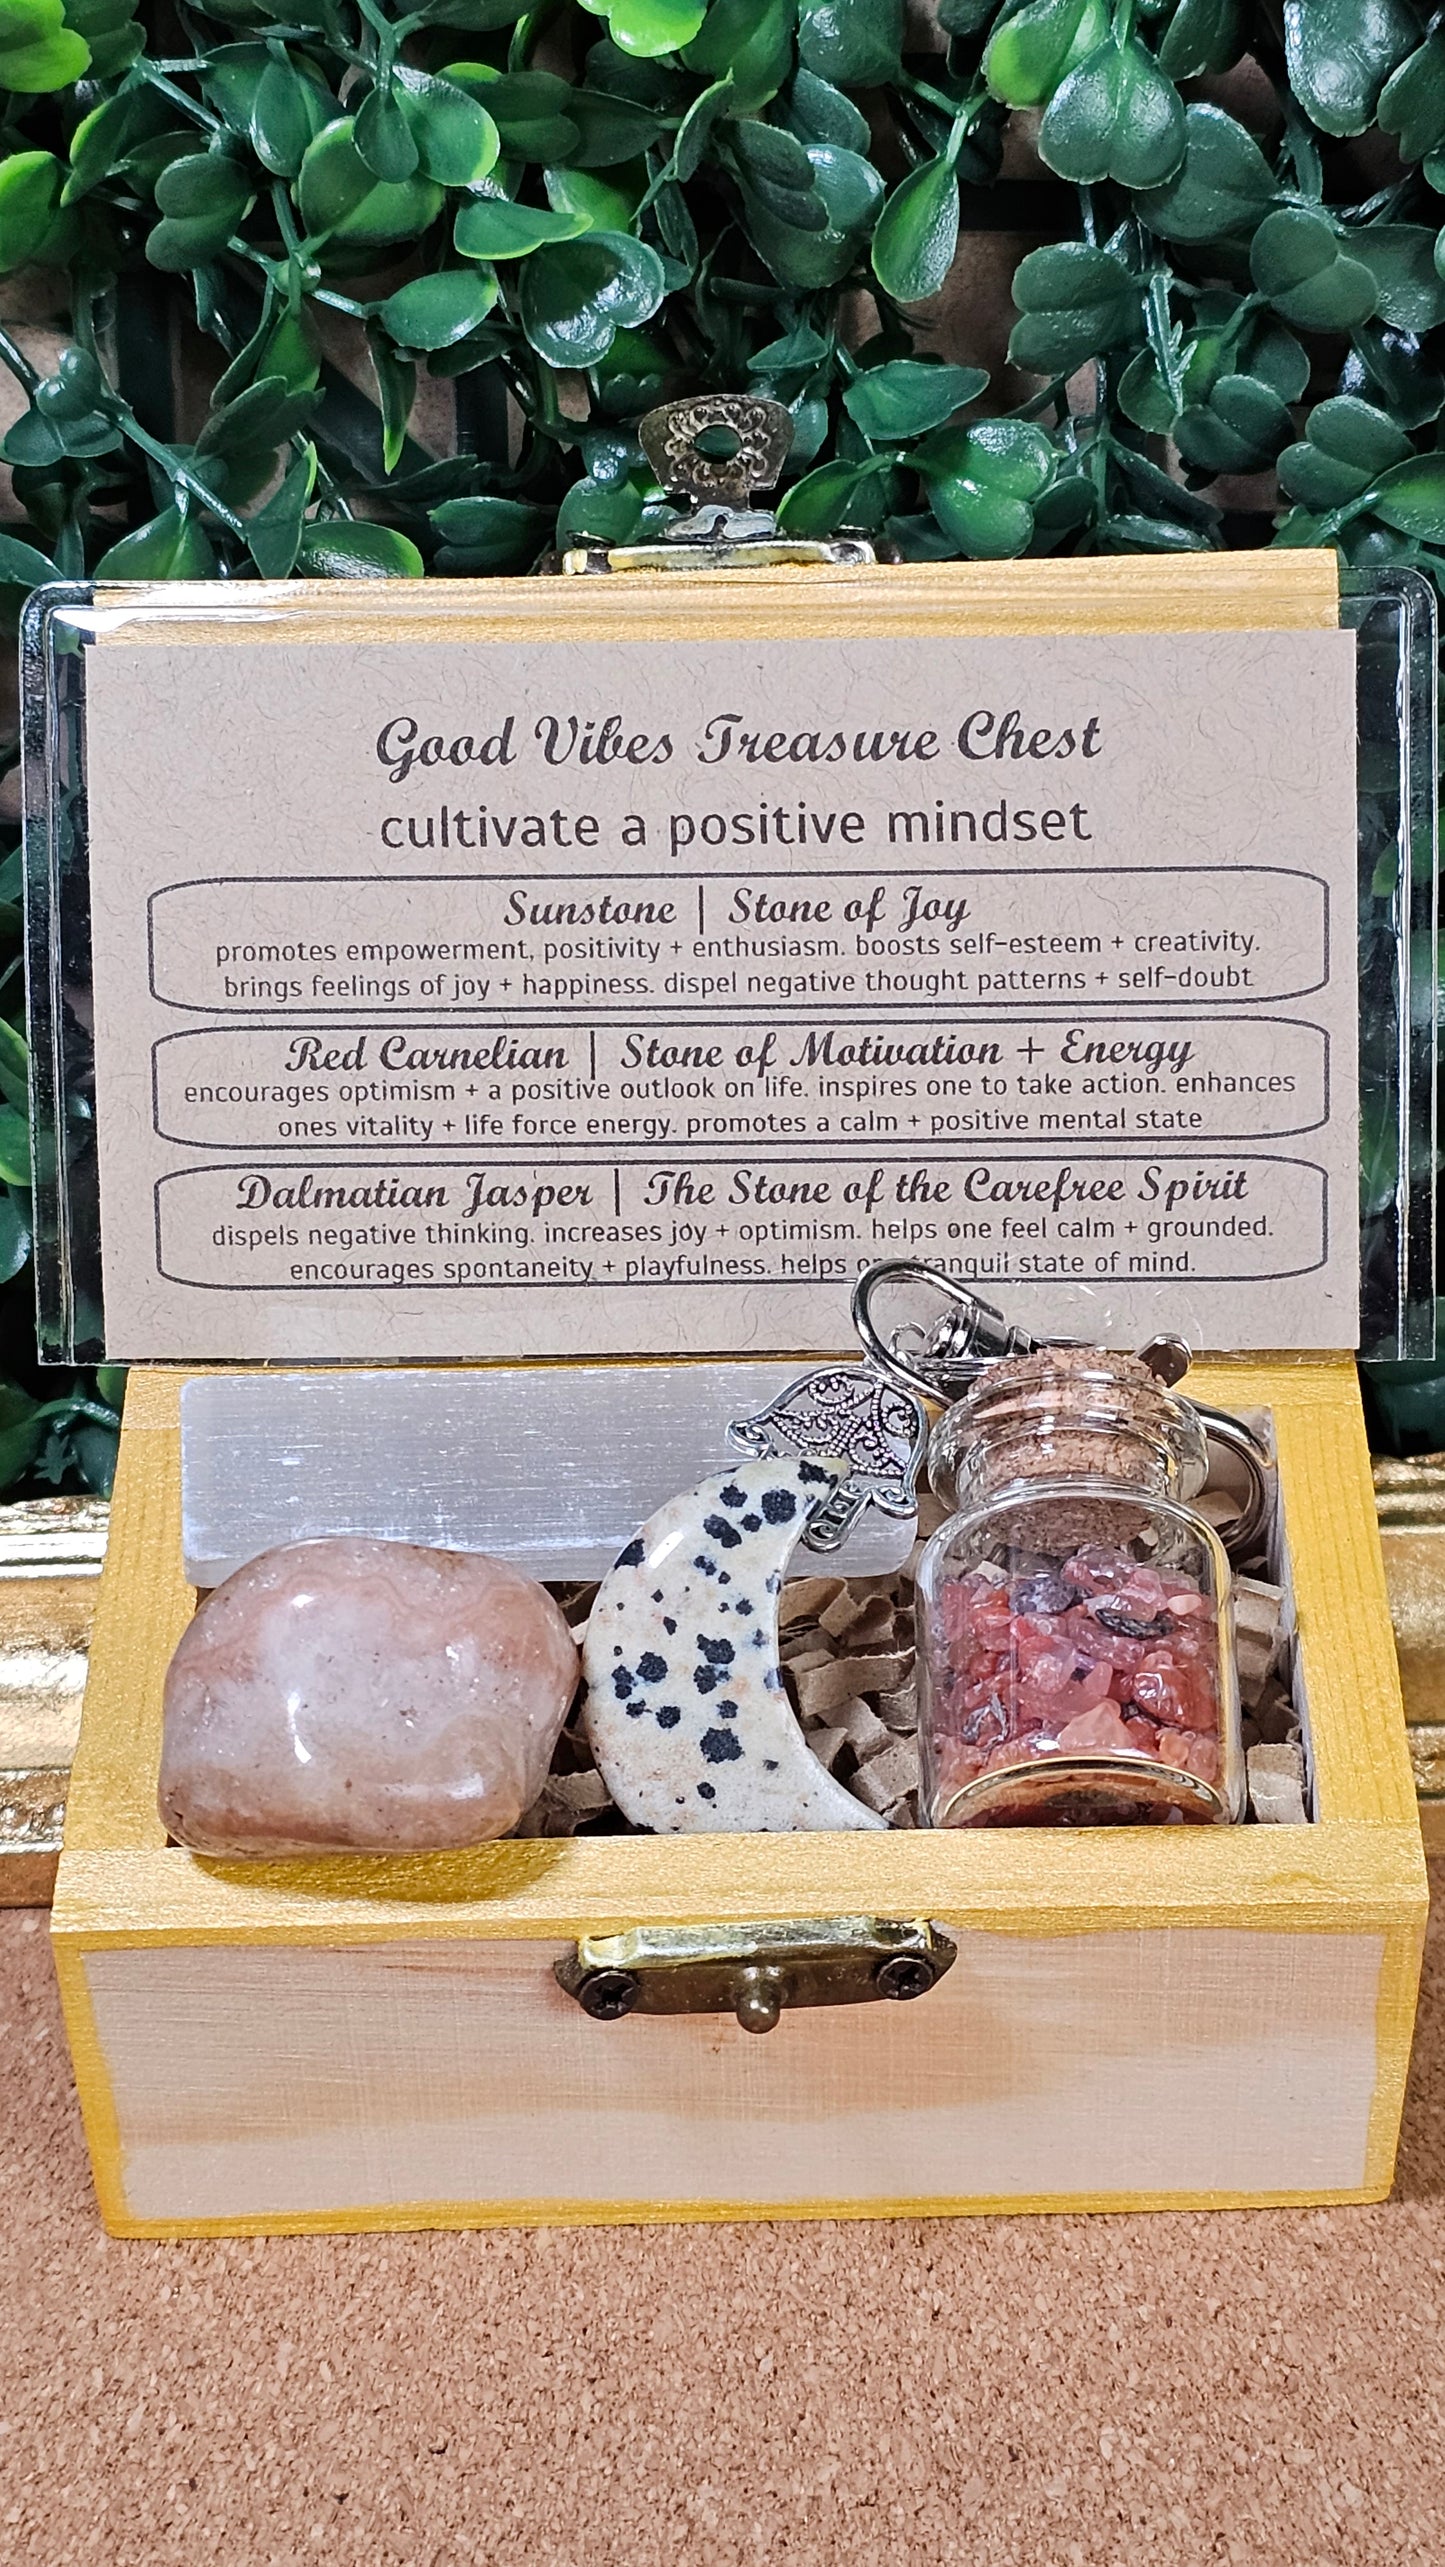 Cultivate a Positive Mindset - Treasure Chest